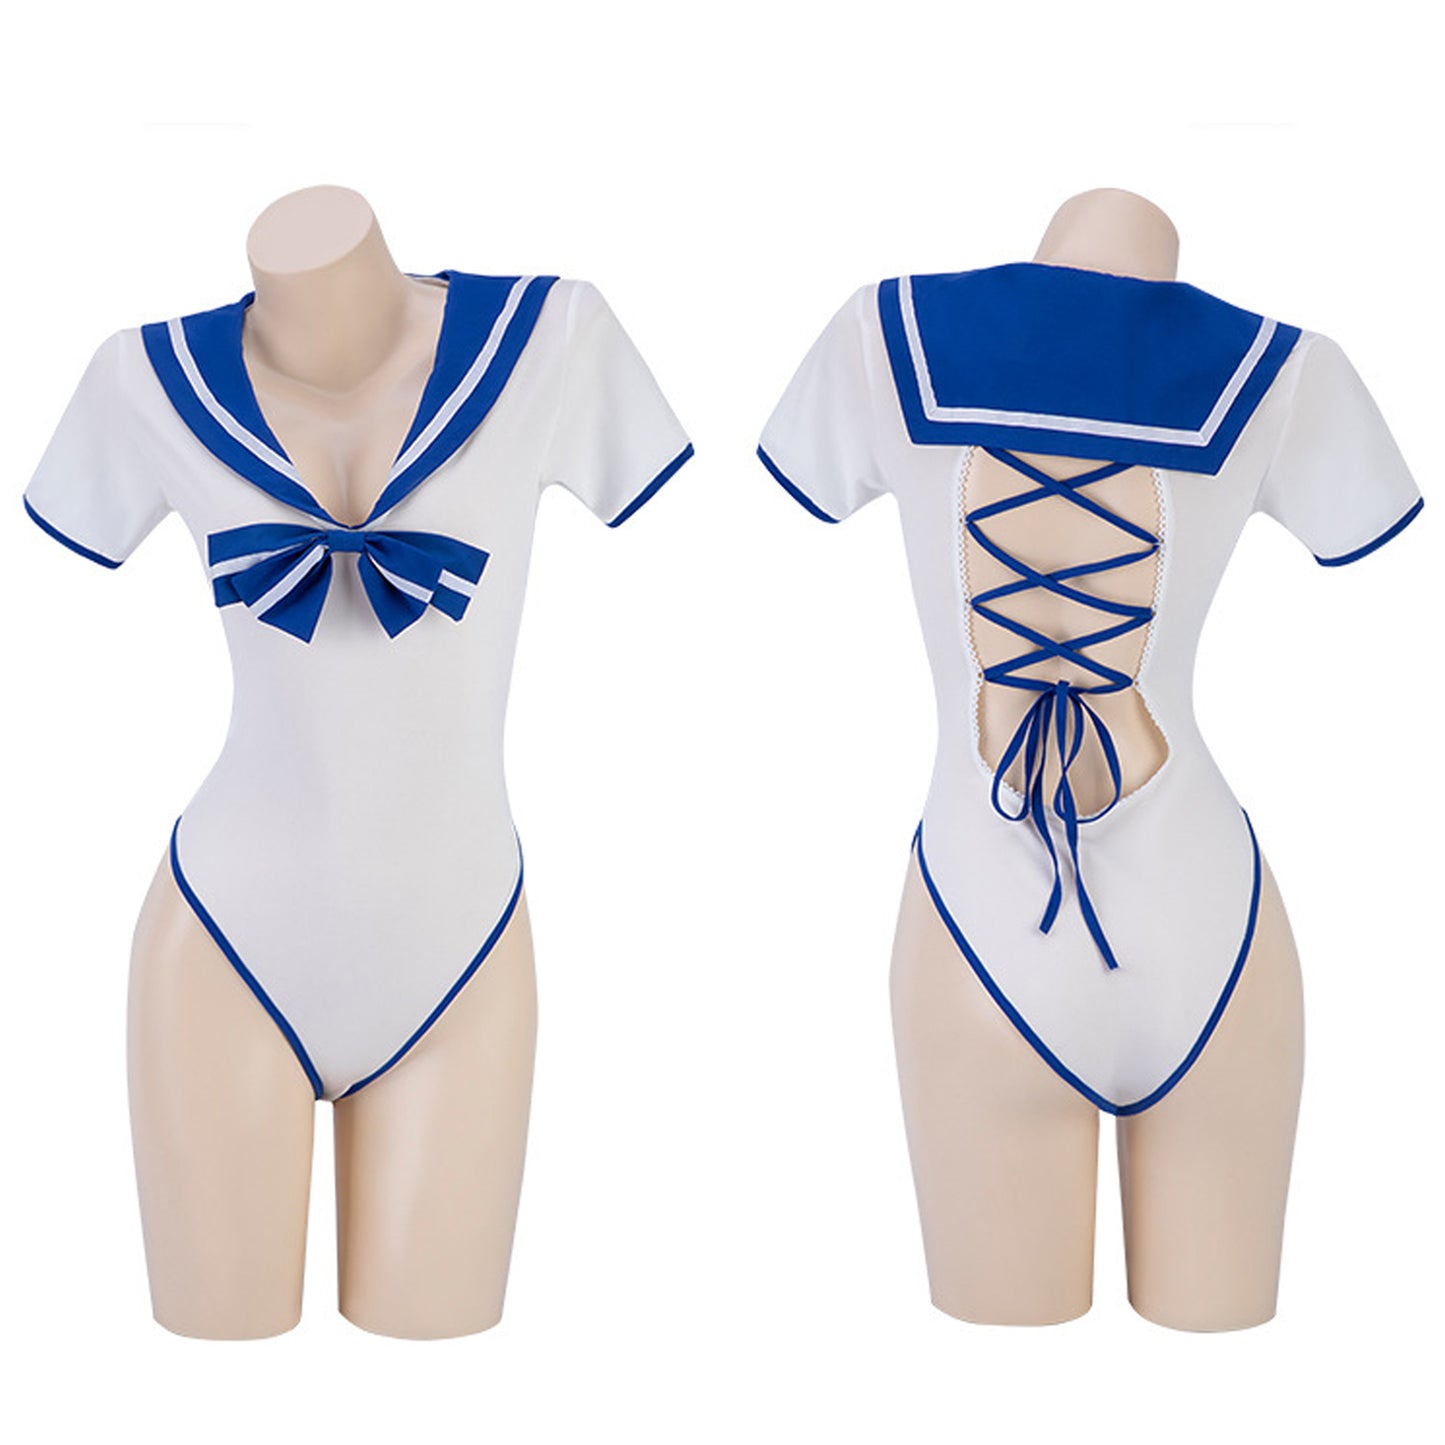 Yomorio Japanese Schoolgirl Bodysuit Anime School Cosplay Outfit Back Lace-Up One Piece Lingerie